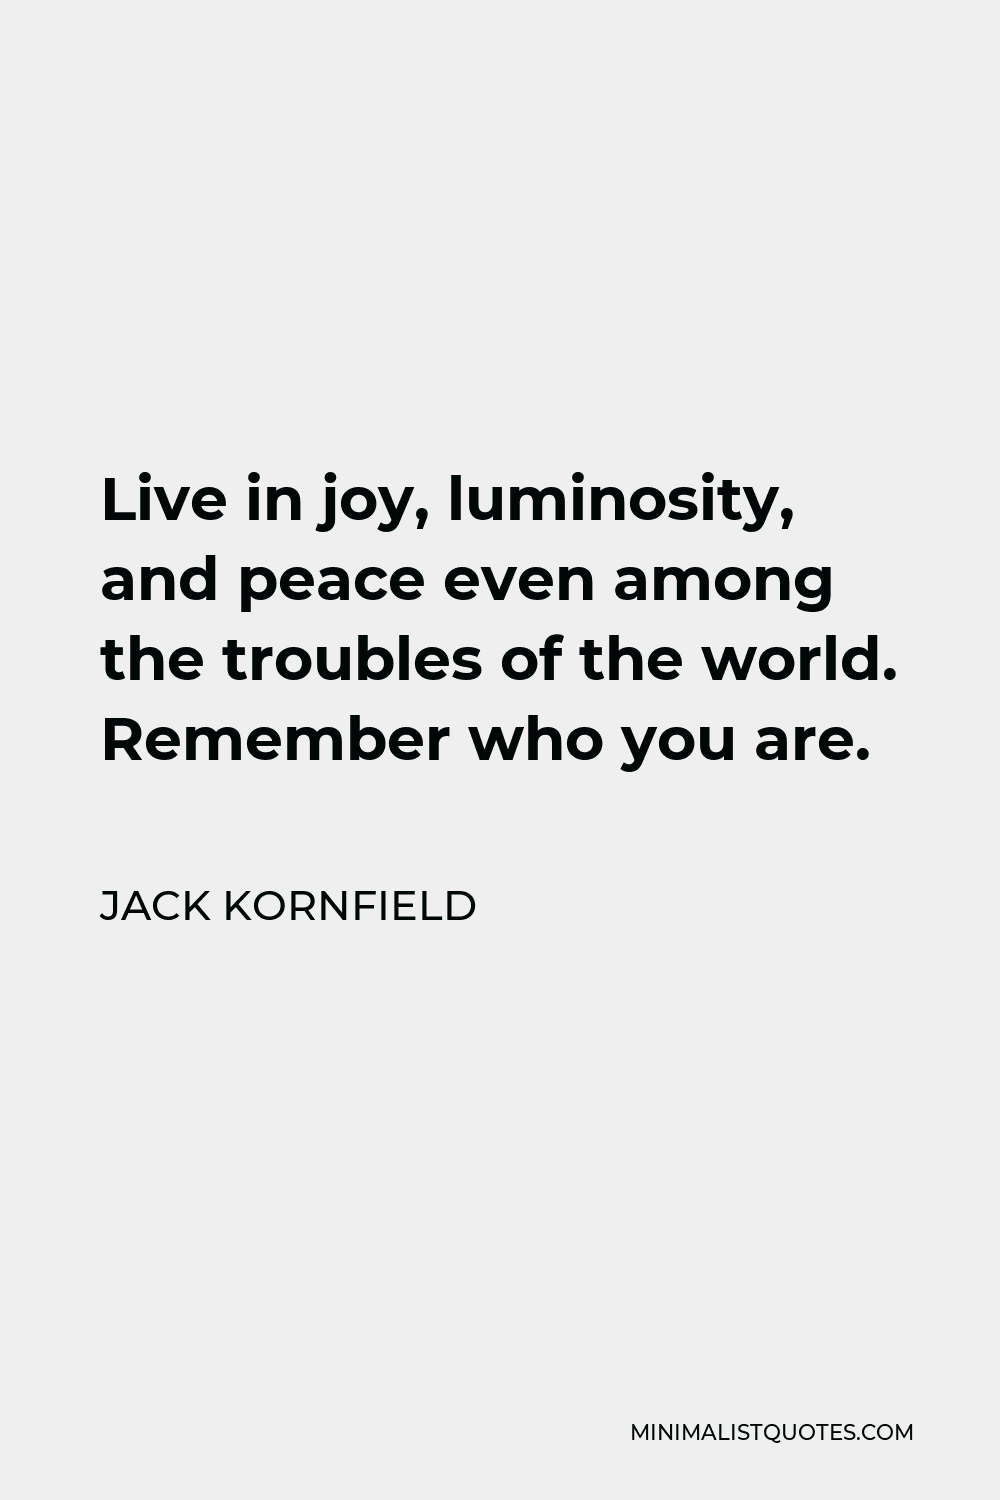 Jack Kornfield Quote - Live in joy, luminosity, and peace even among the troubles of the world. Remember who you are.